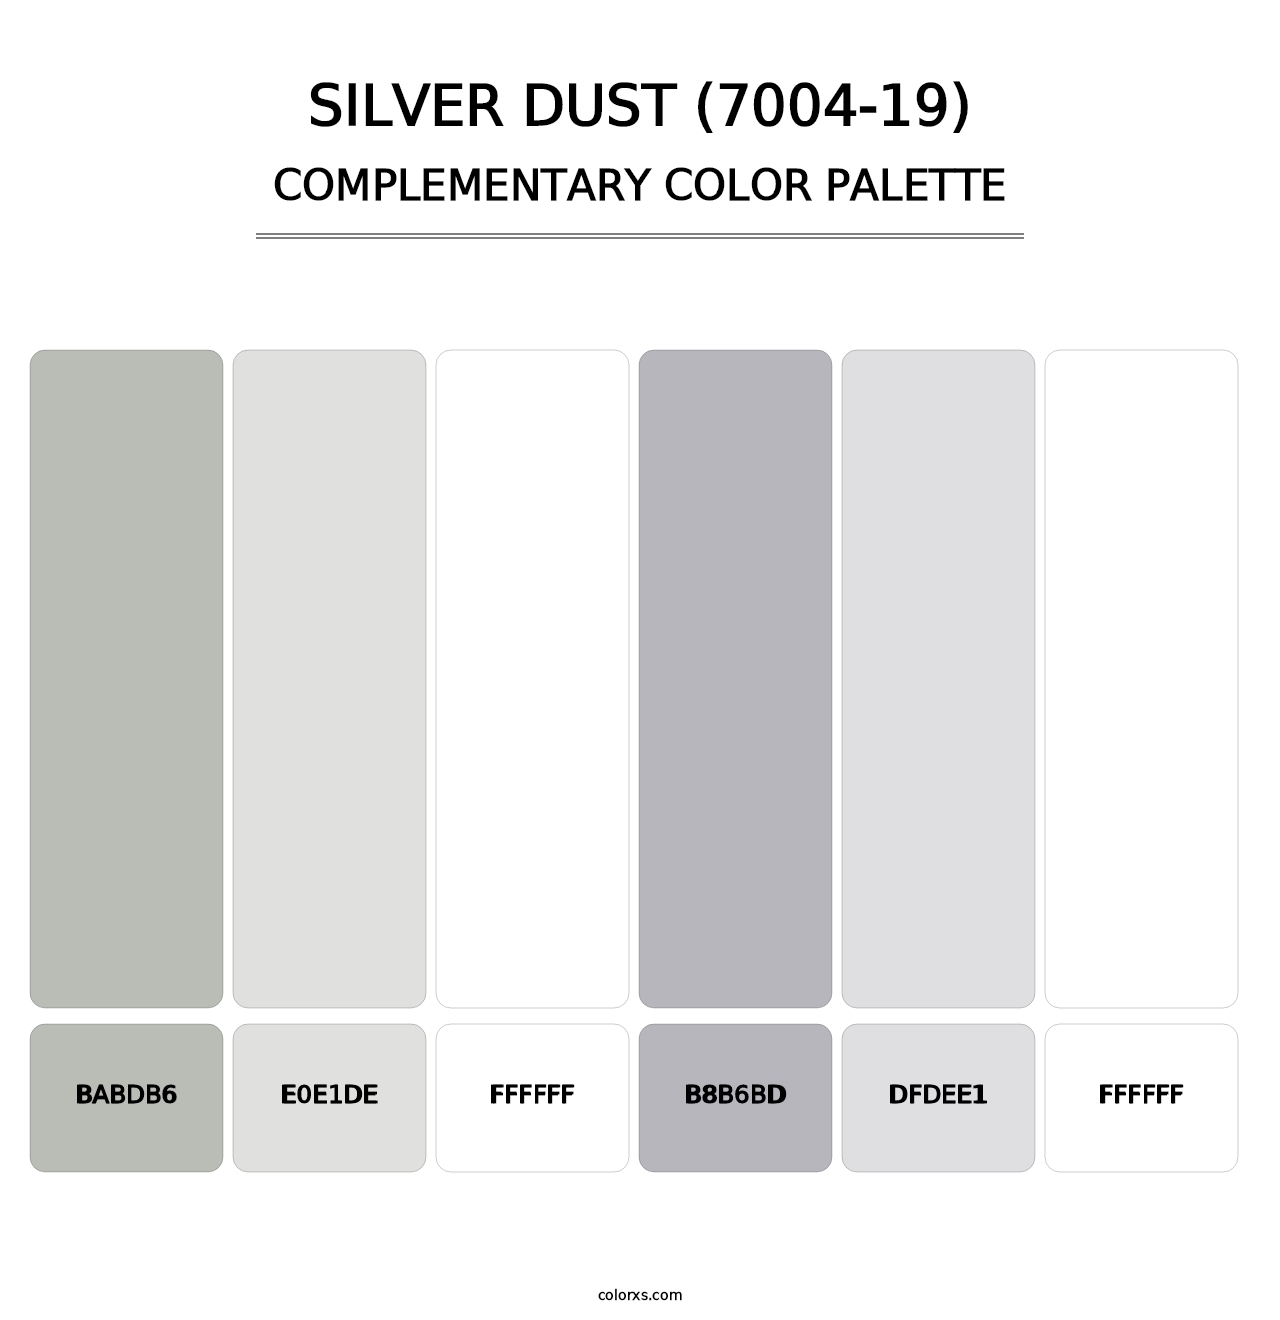 Silver Dust (7004-19) - Complementary Color Palette